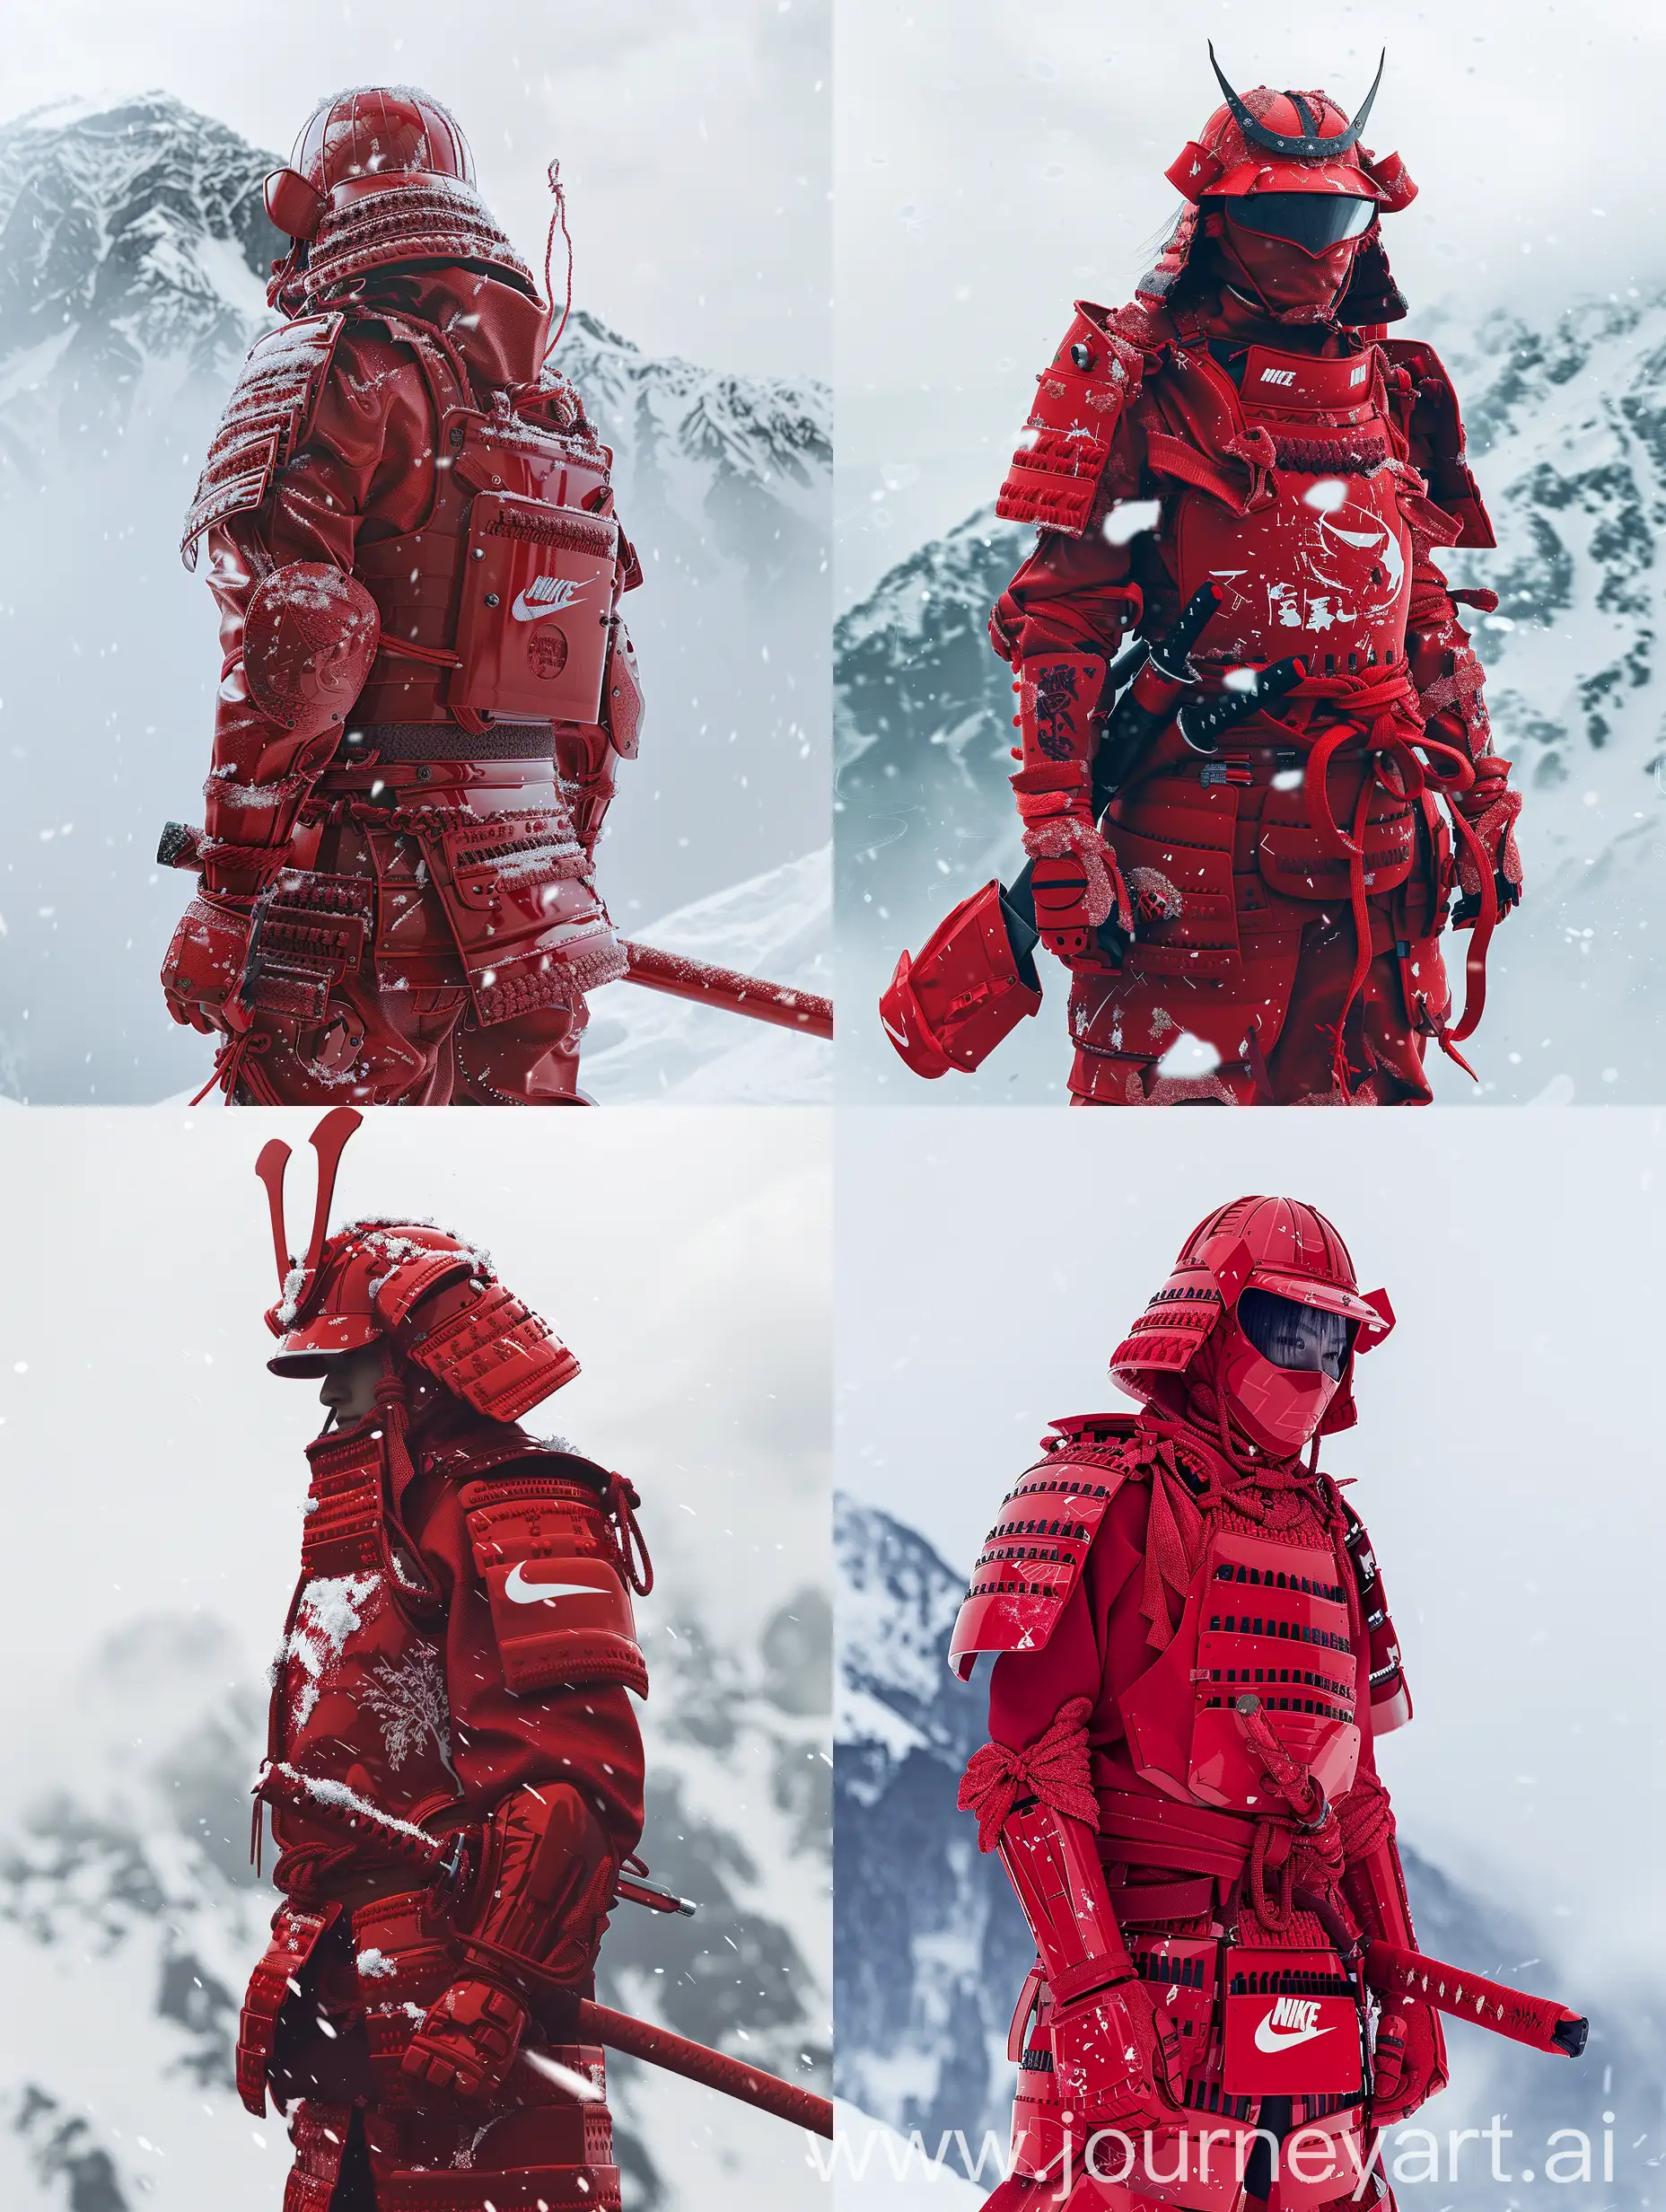 Red-Nike-Samurai-Warrior-Stands-Against-Snowy-Mountain